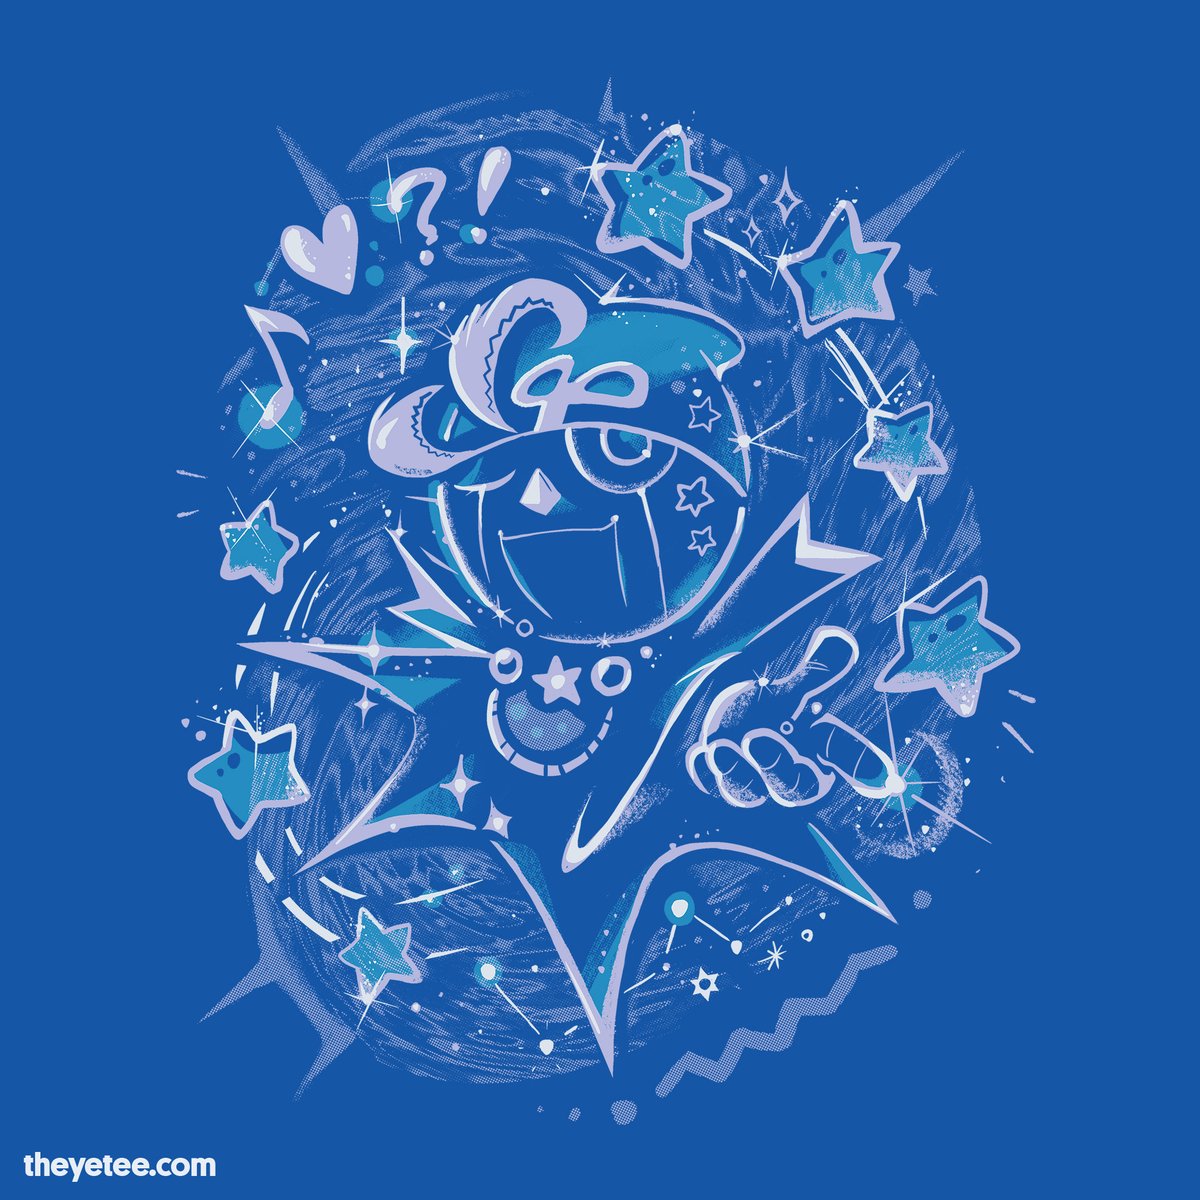 「We wish we may, we wish we might, grant 」|The Yetee 🌈のイラスト